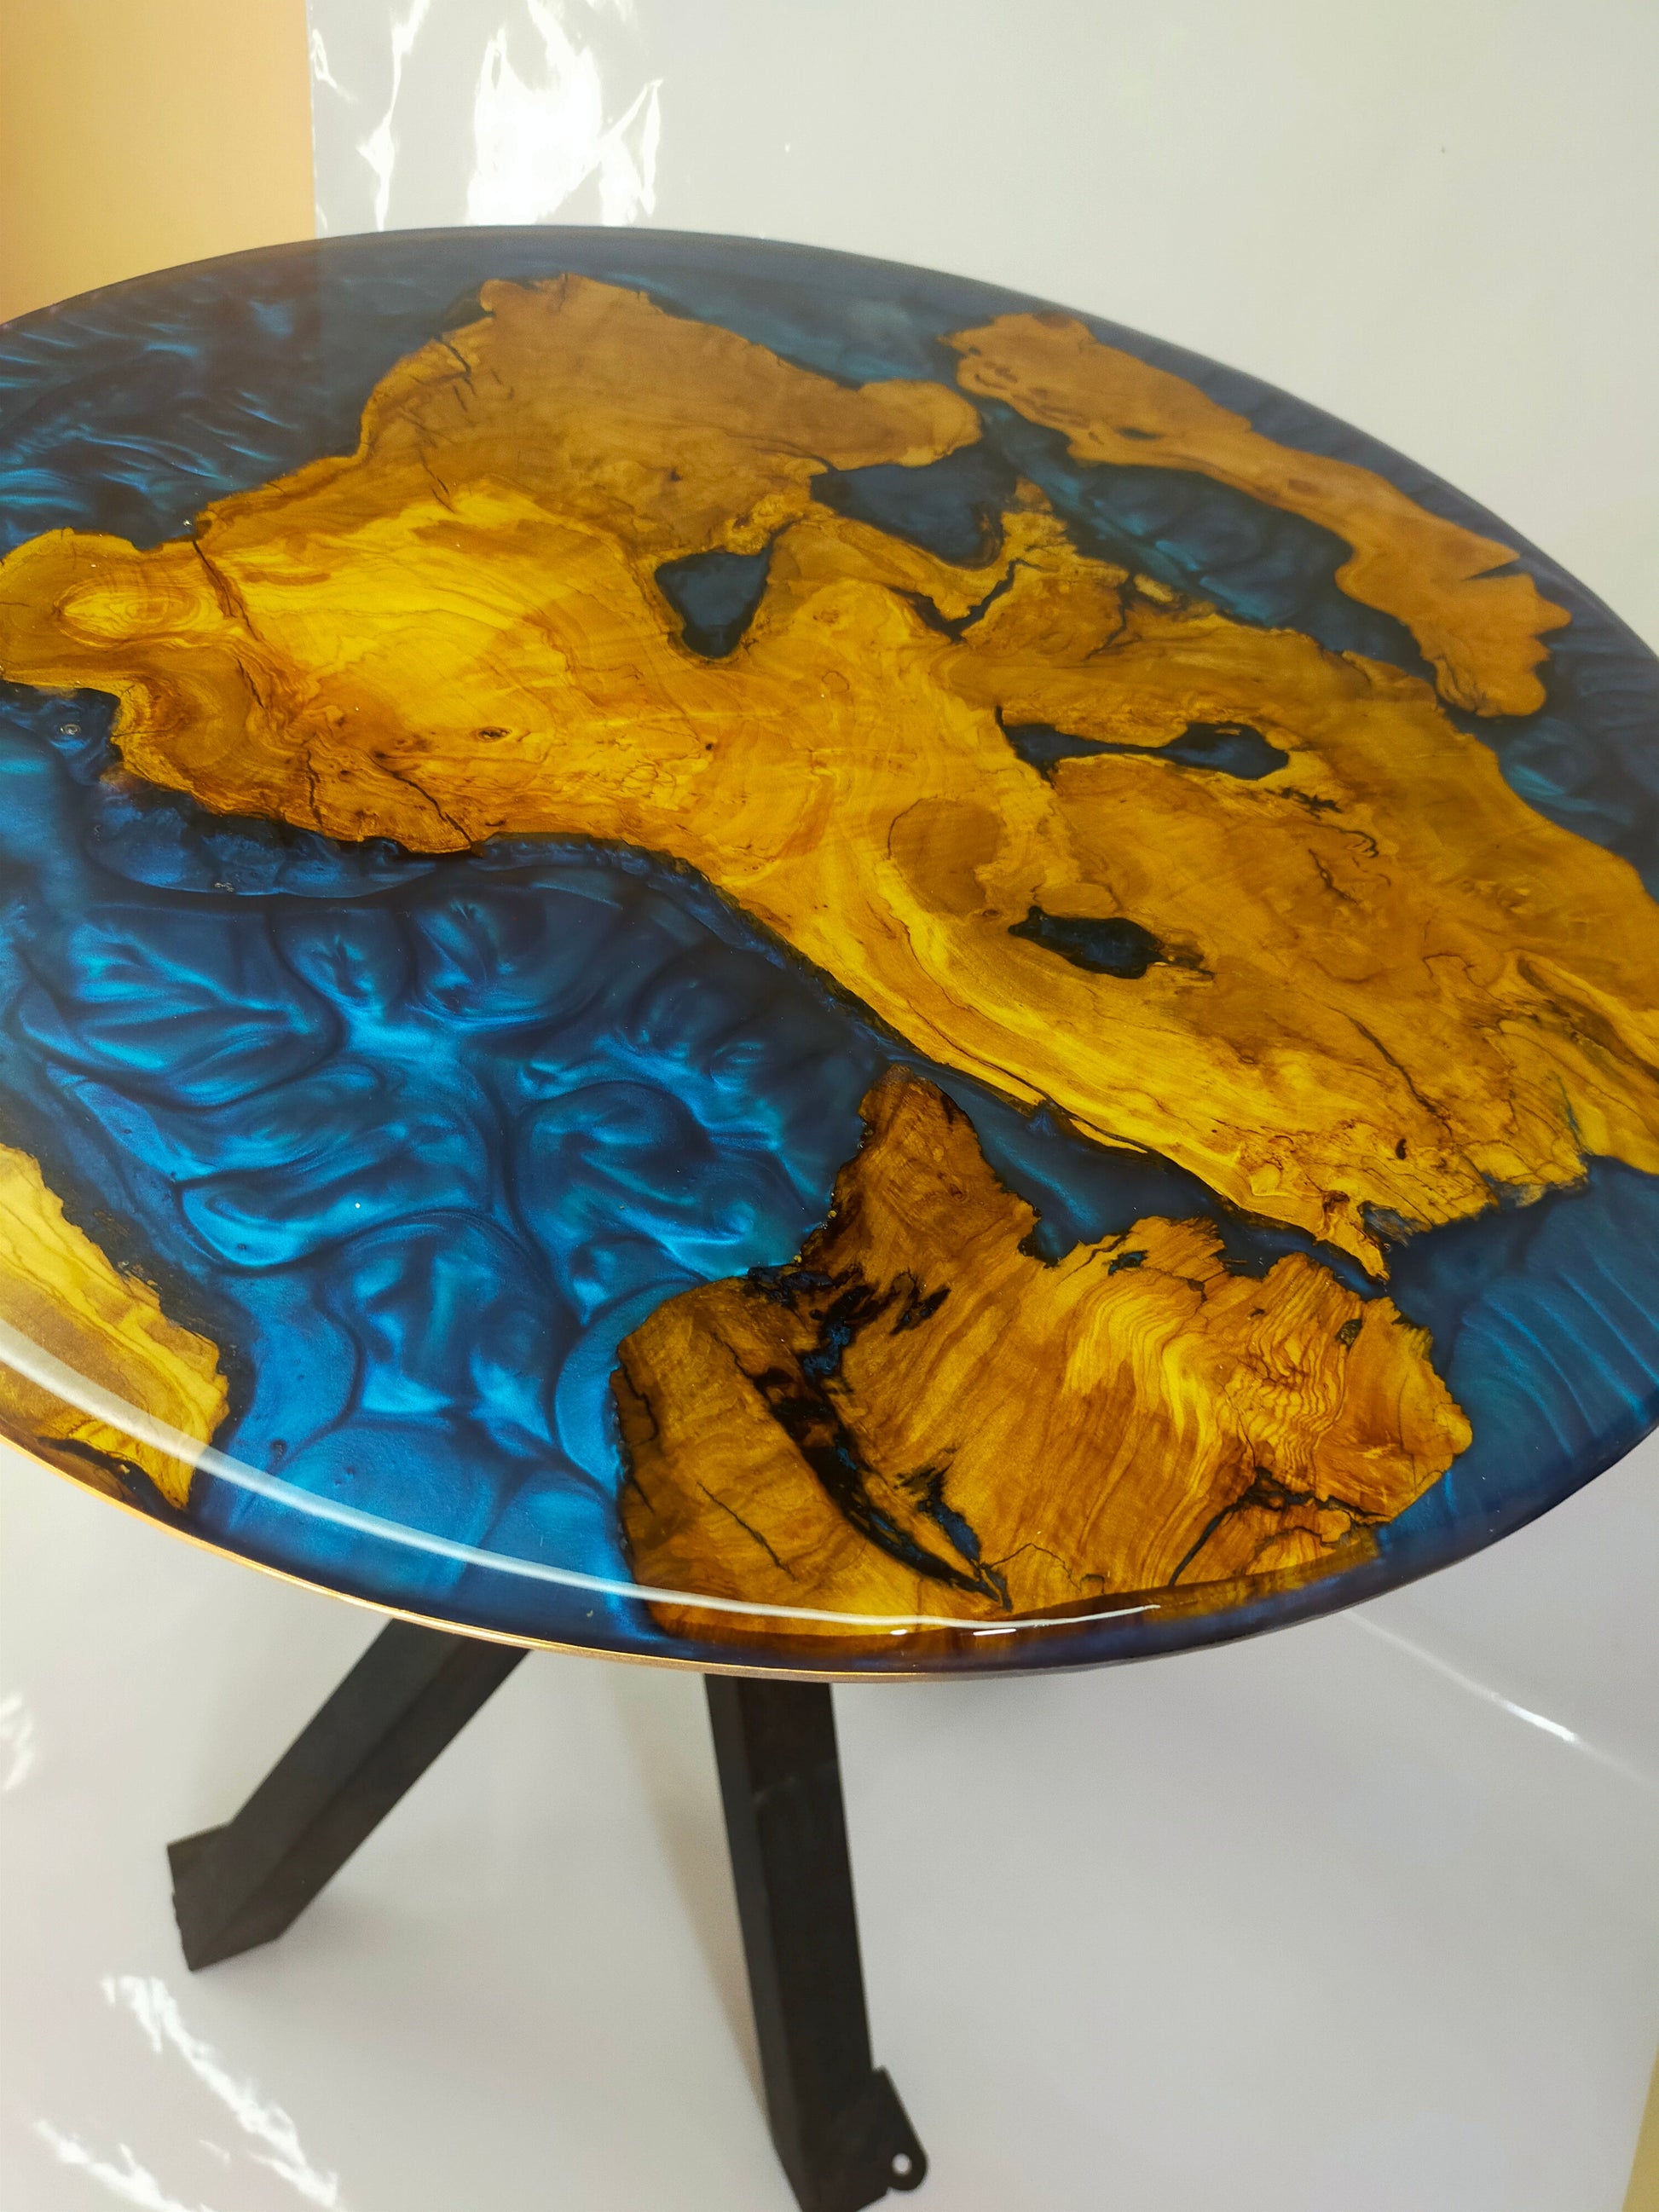 Resin Wood Living - Resin table top Epoxy Coffee table top